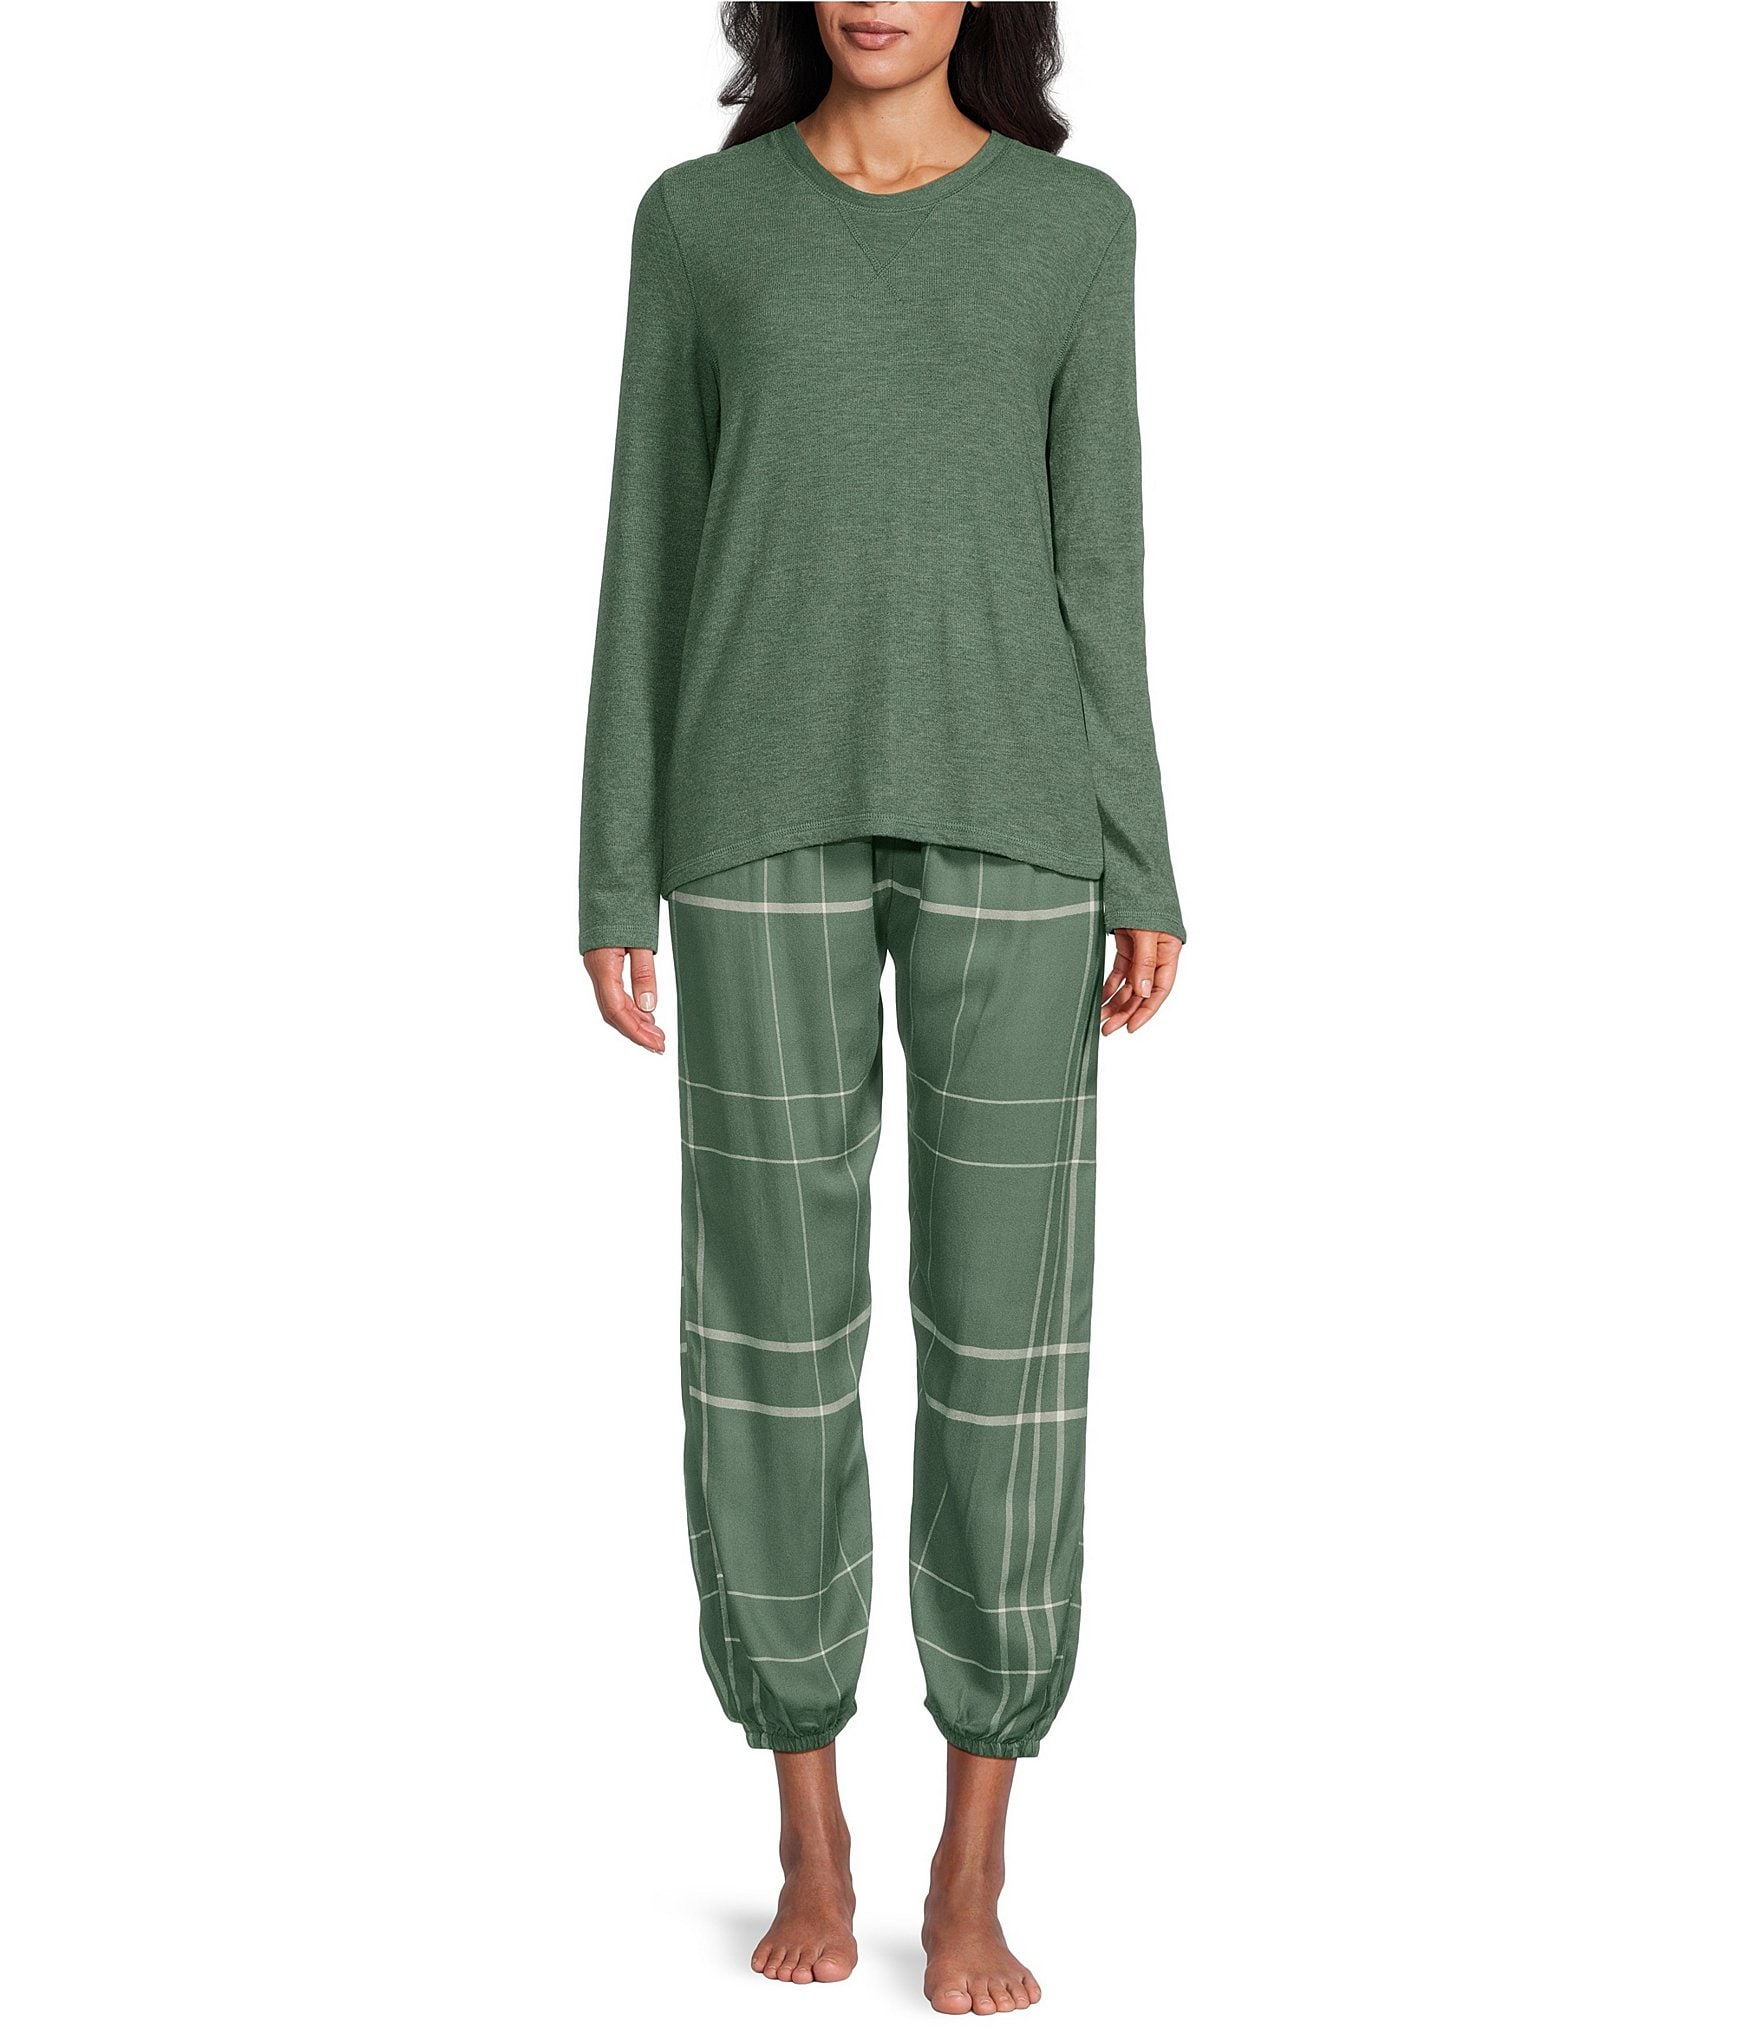 https://dimg.dillards.com/is/image/DillardsZoom/zoom/papinelle-feather-soft-long-sleeve-top--comfy-plaid-pocketed-jogger-pajama-set/00000000_zi_76745adc-13ad-480d-93be-78f54a81971a.jpg